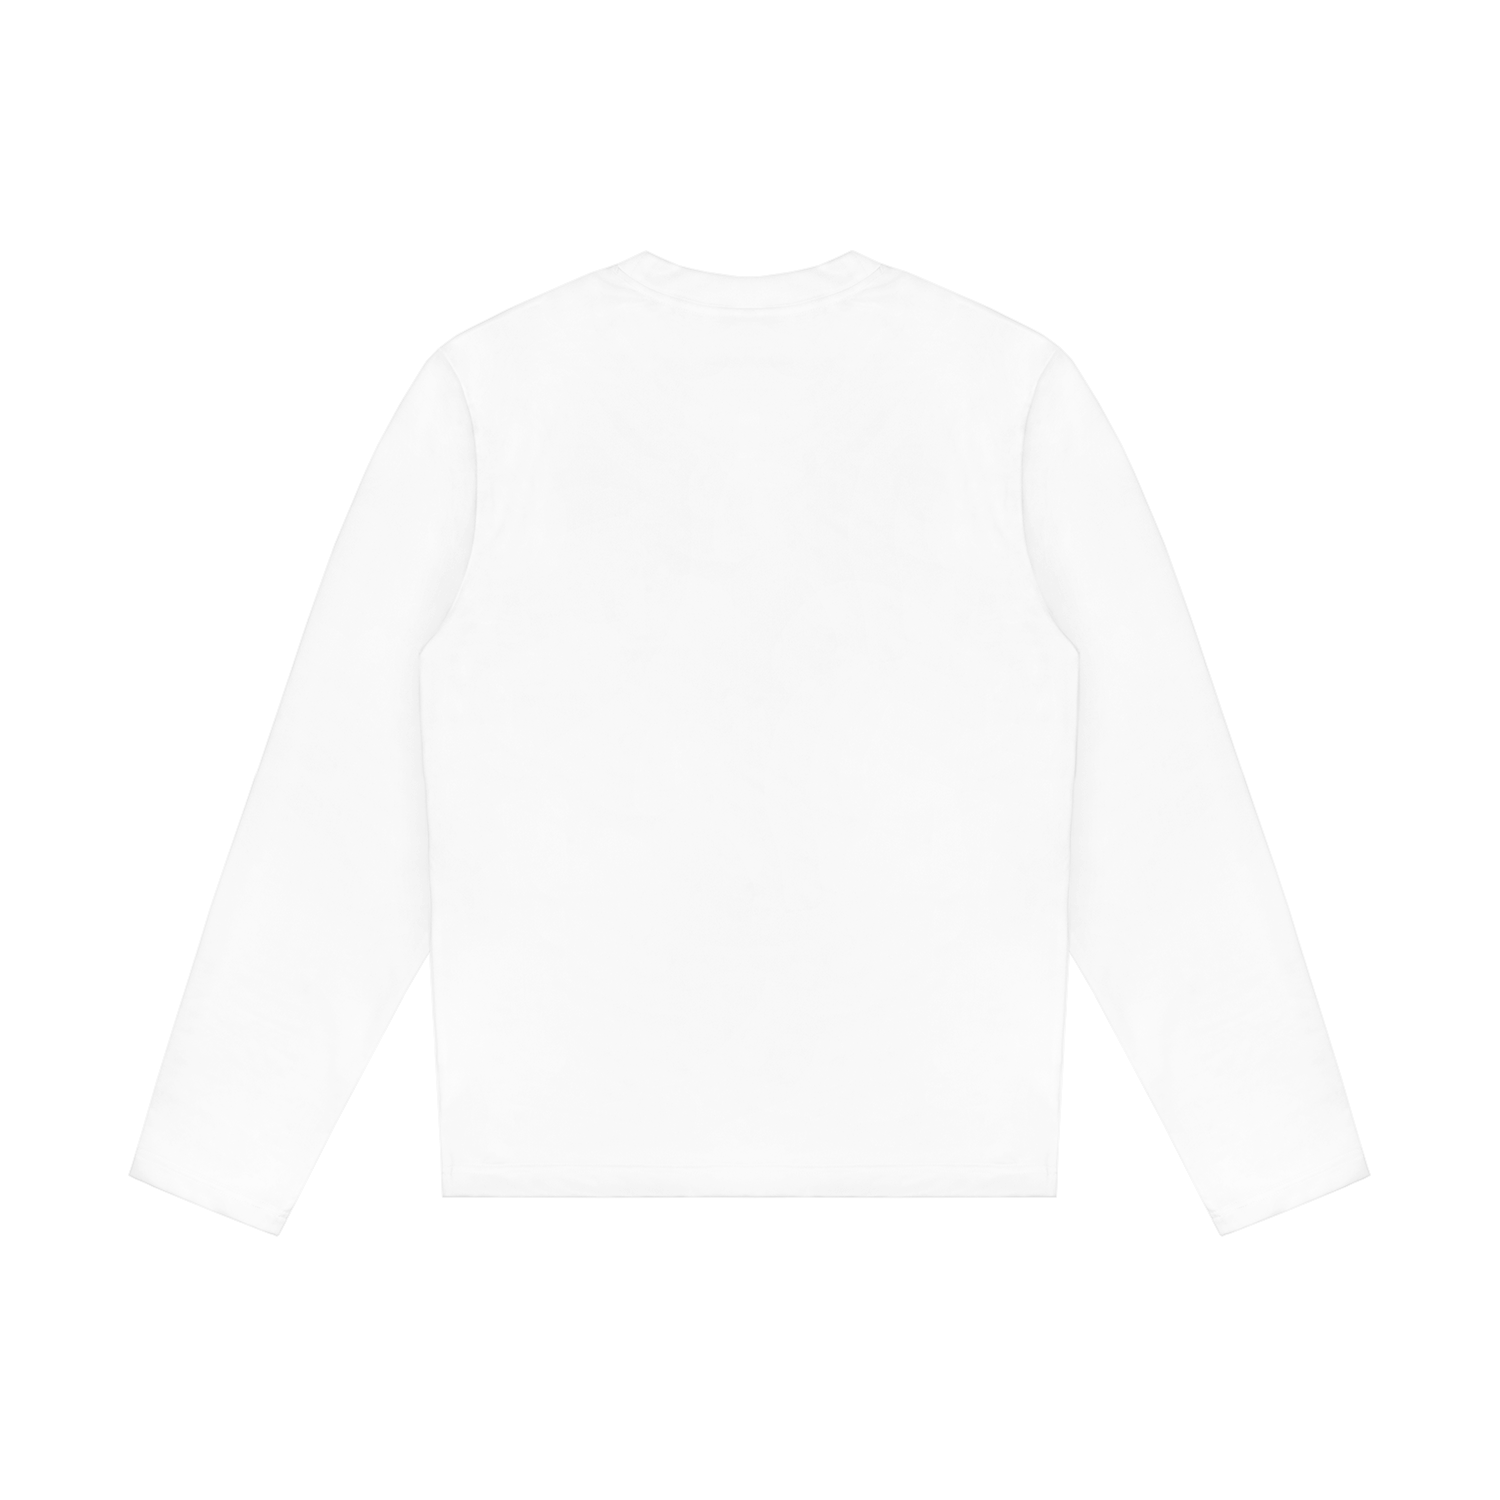 All-Over Print Unisex Quick Dry Long Sleeve Tee | HugePOD-3